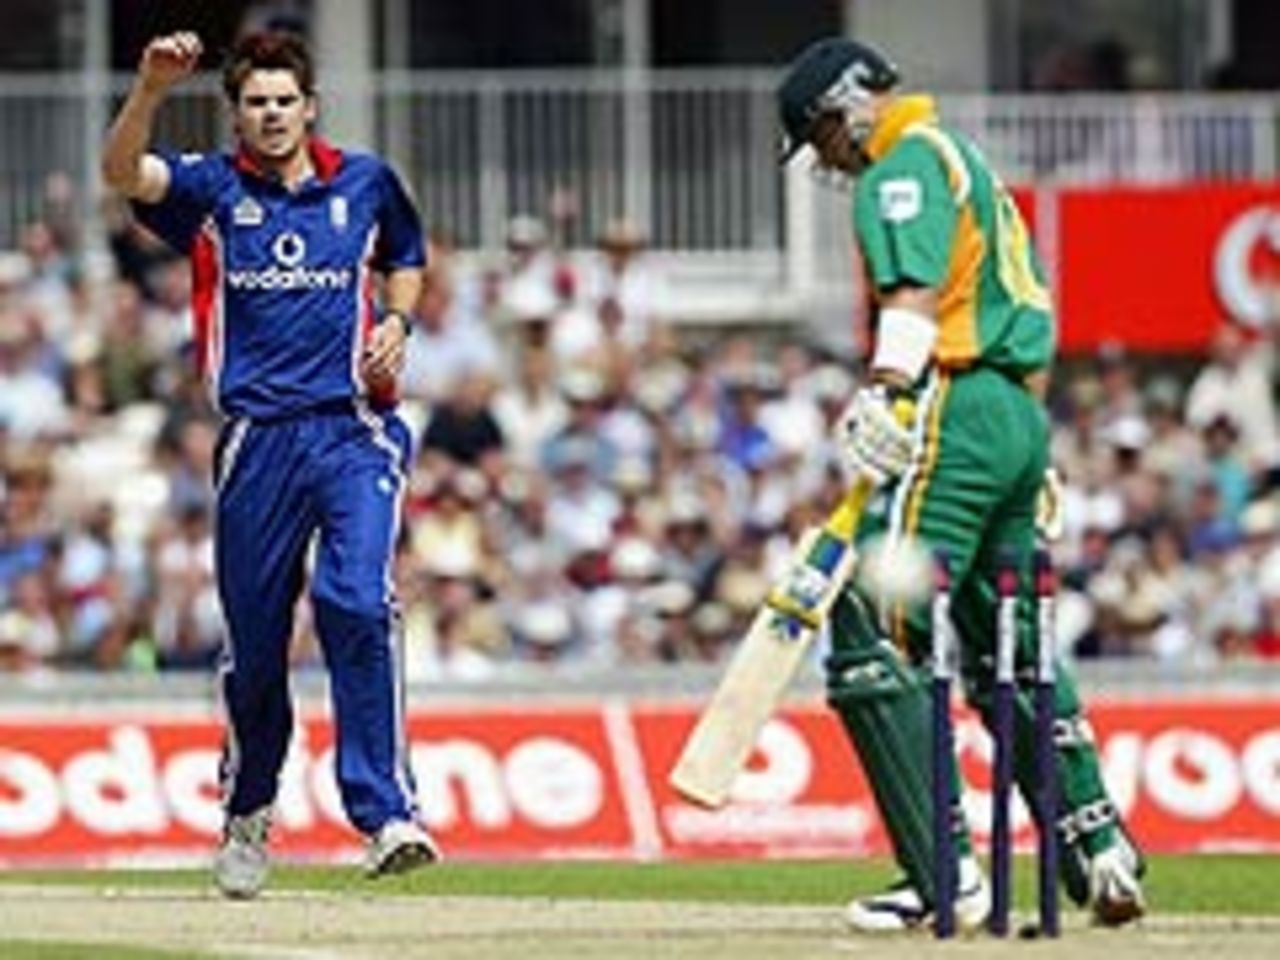 James Anderson bowls Herschelle Gibbs, England v South Africa, The Oval, June 28, 2003